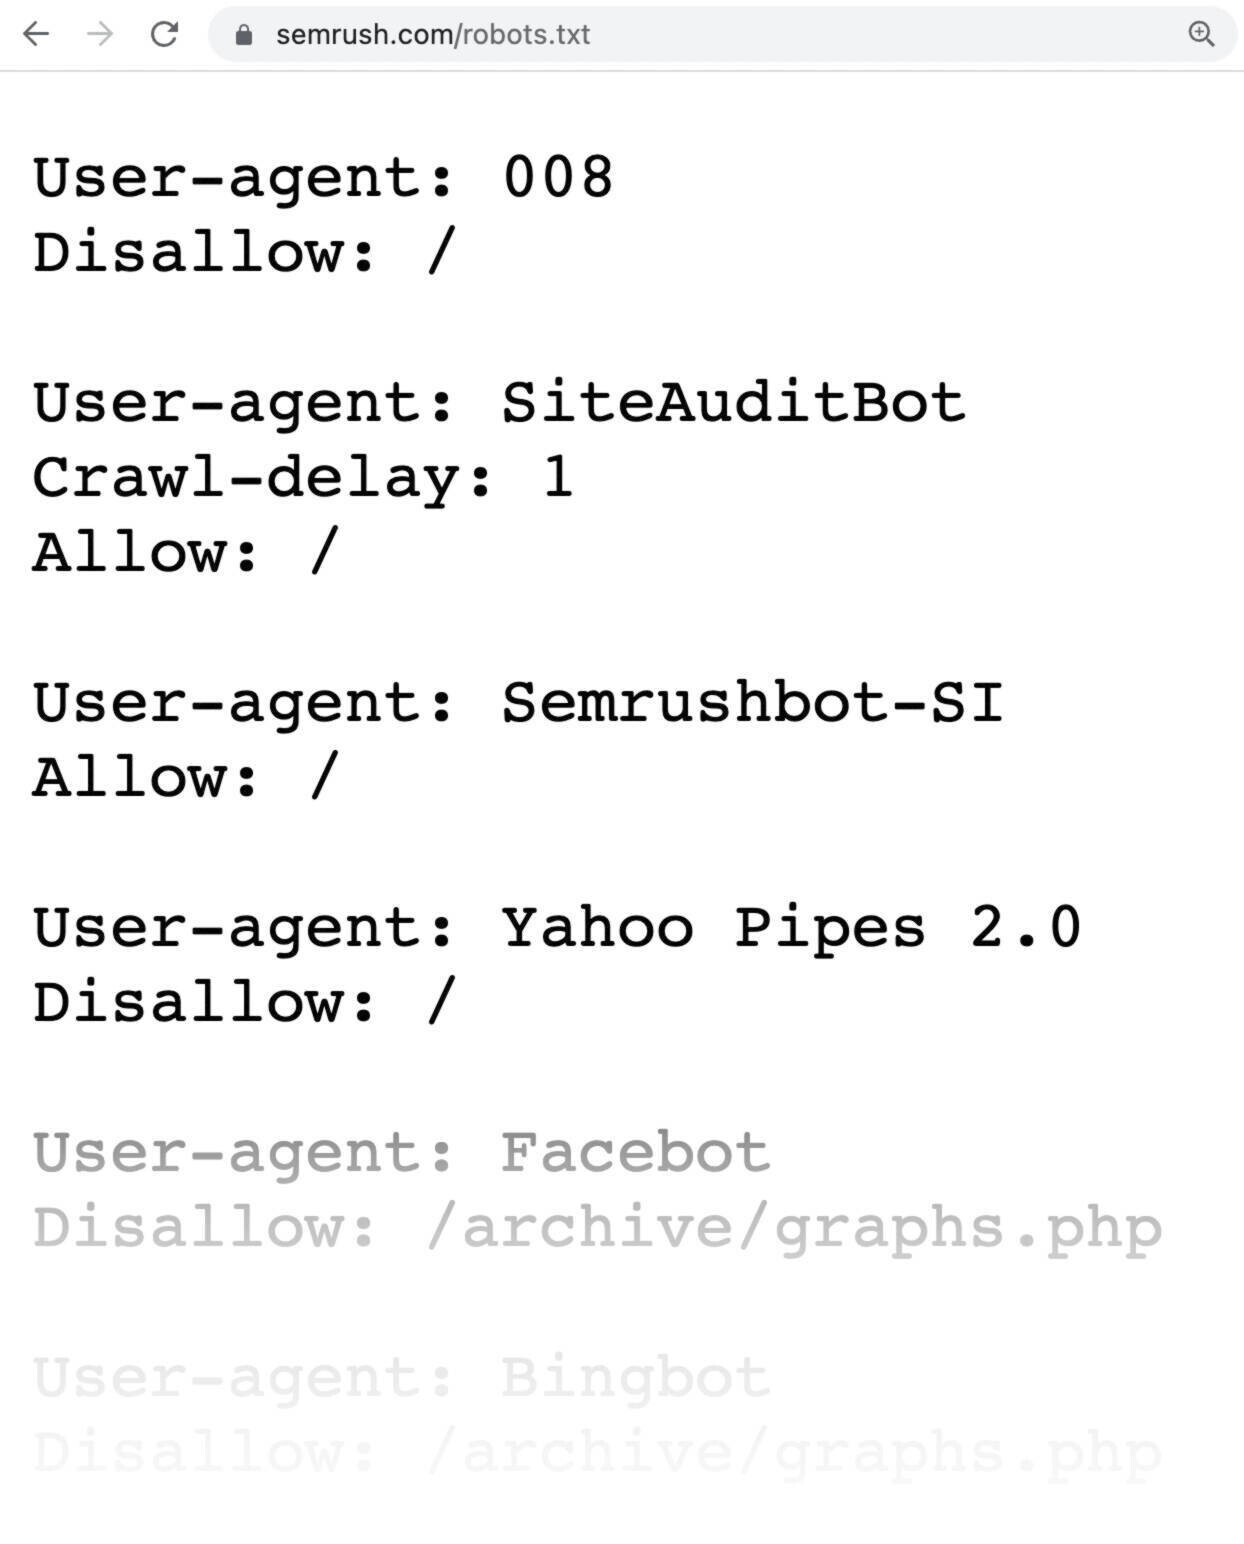 A section of Semrush’s robots.txt file